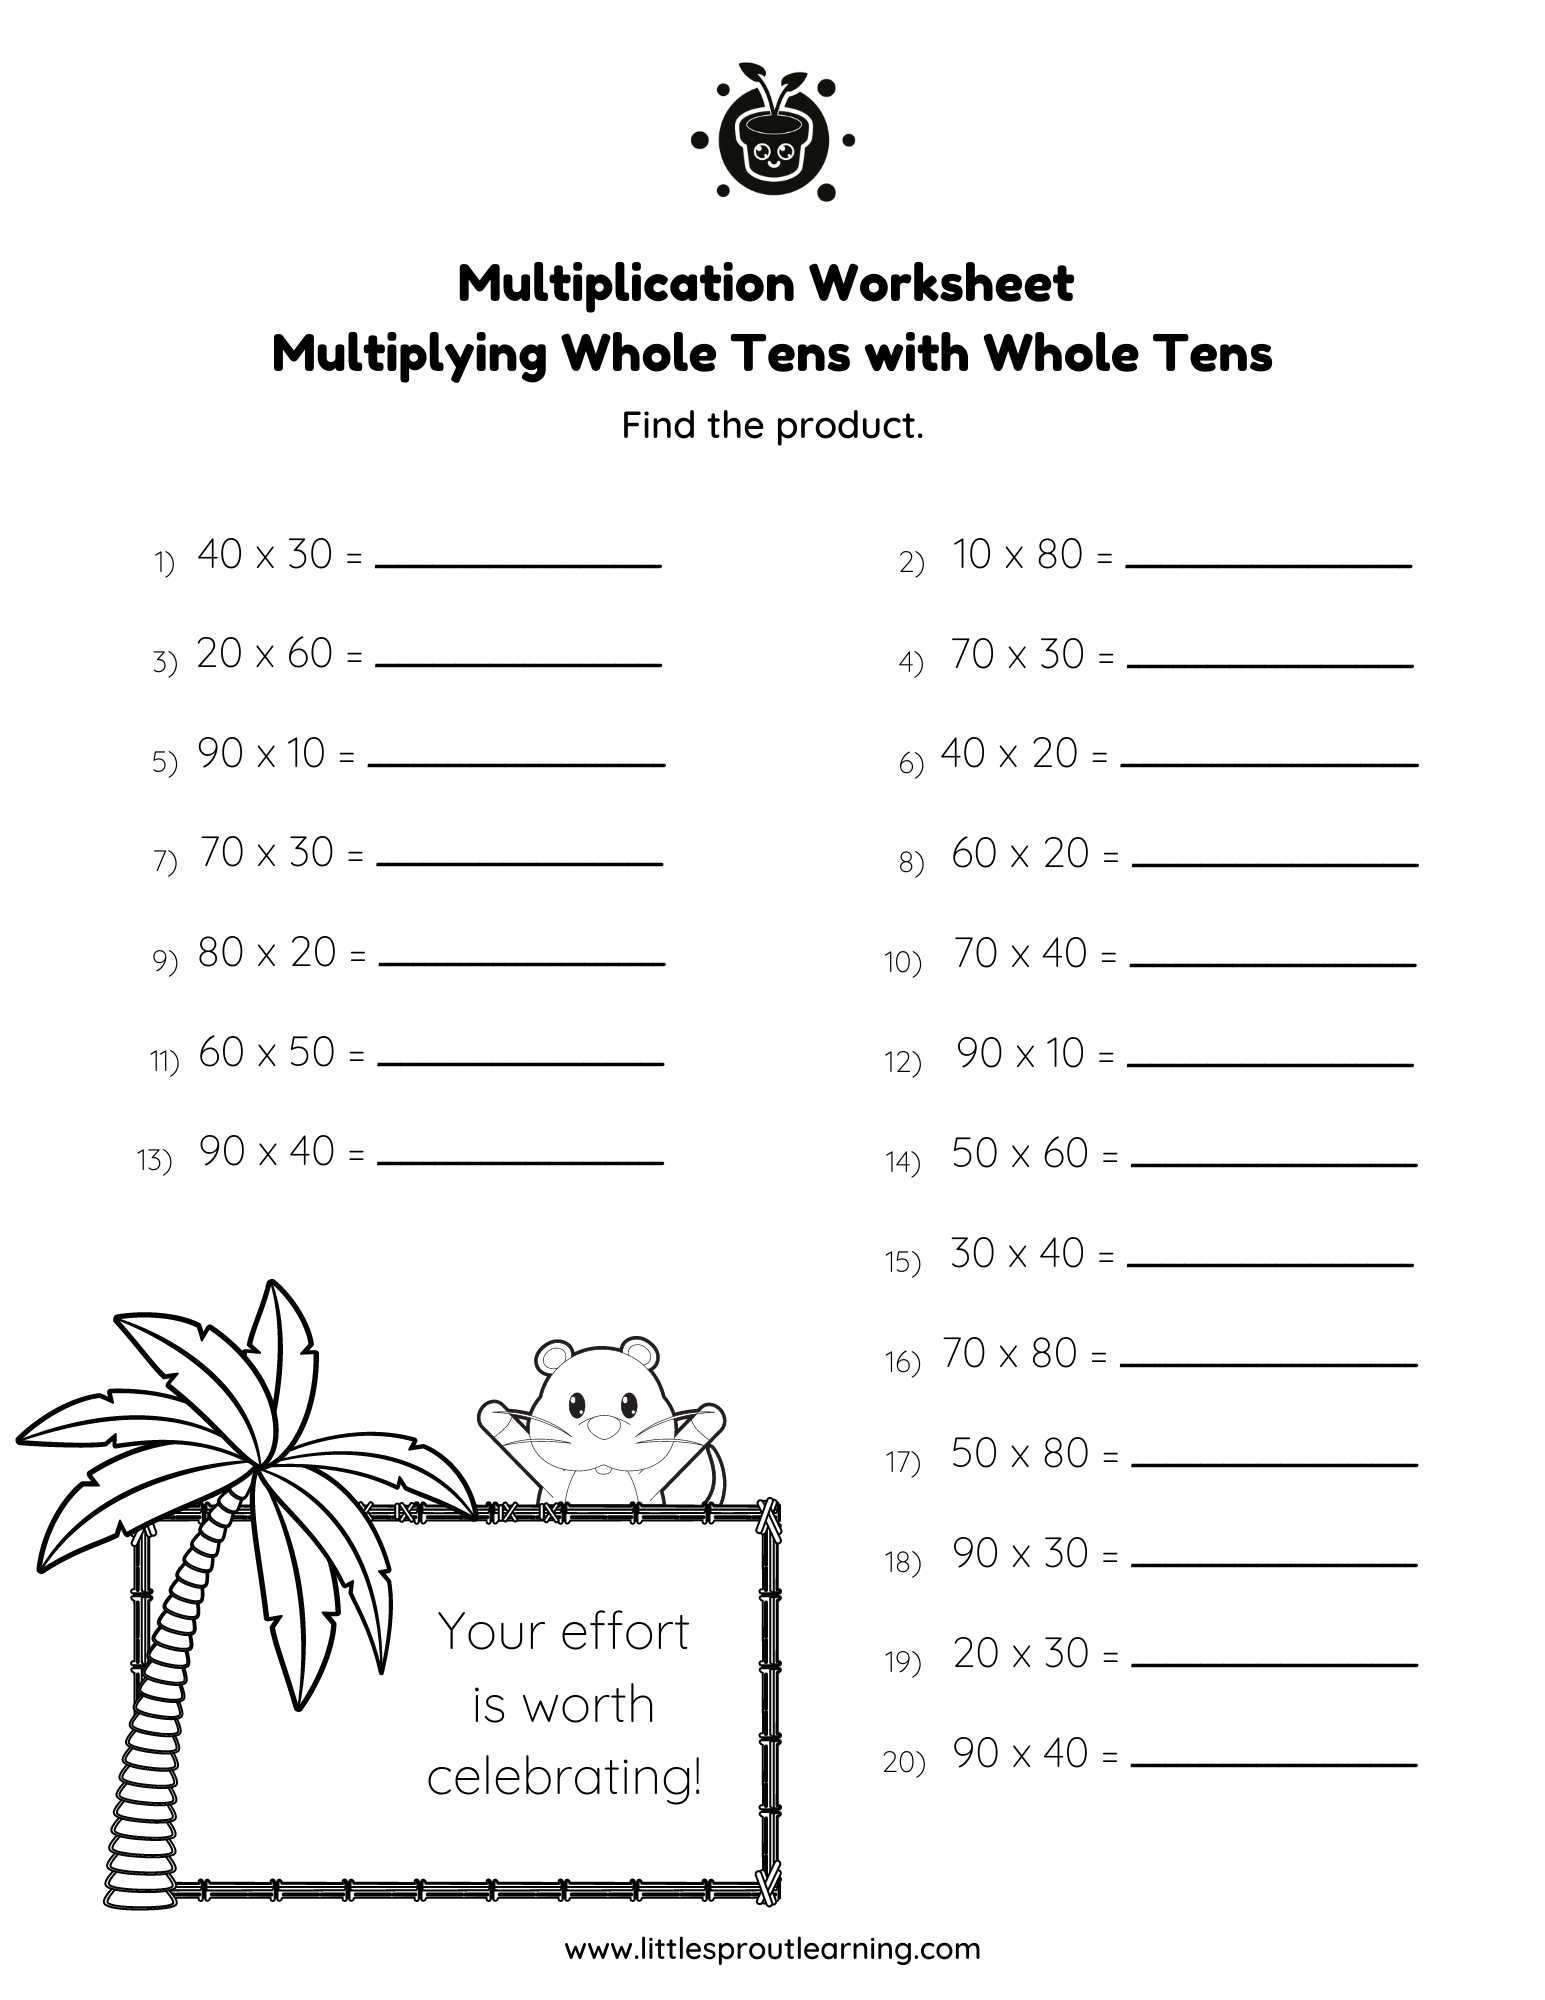 Multiplication Worksheet – Multiplying Whole Tens with Whole Tens